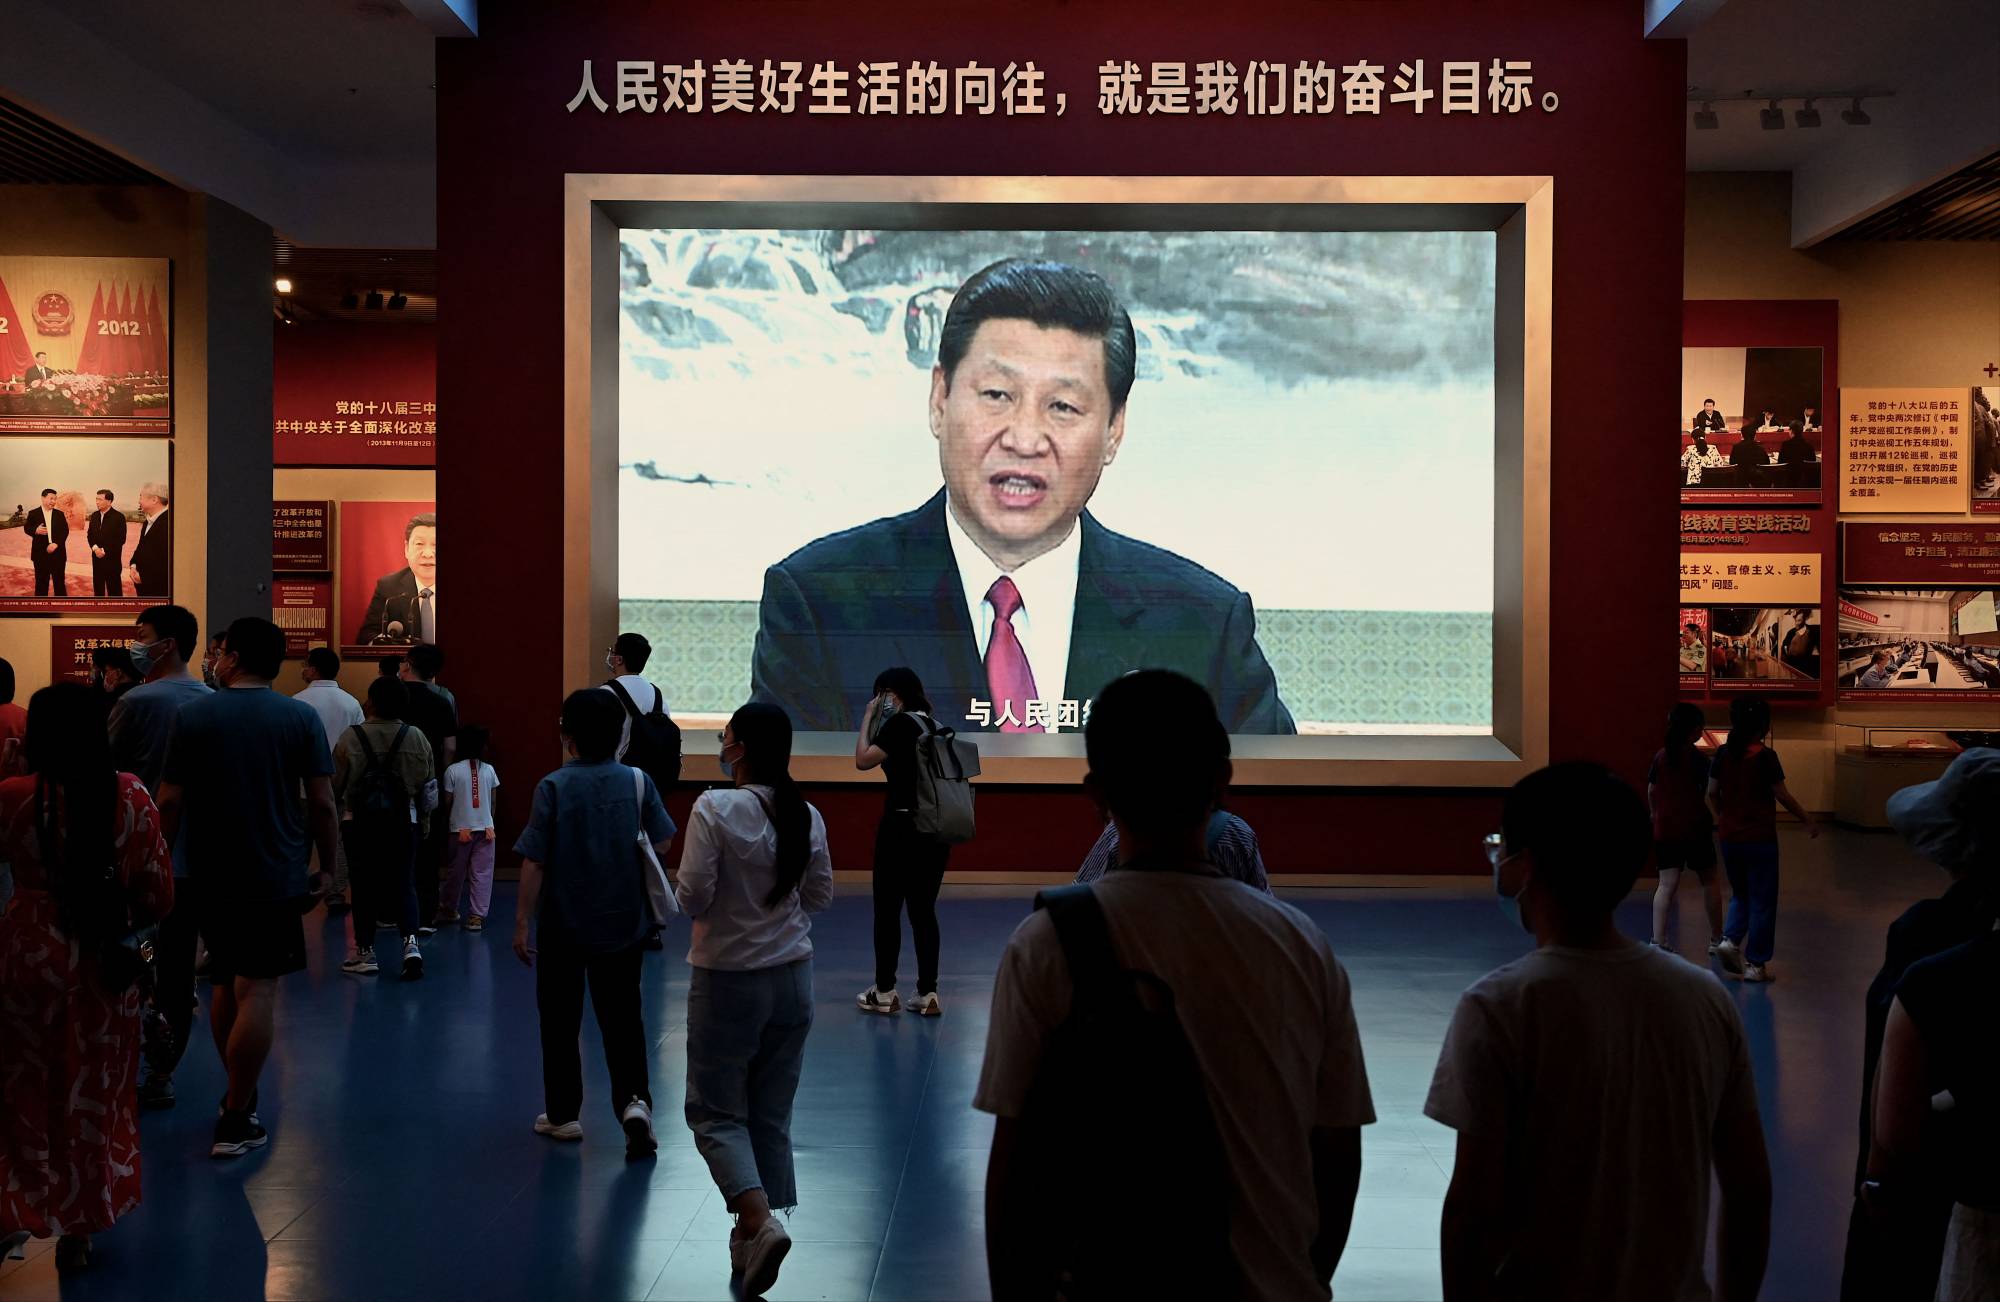 People walk past a screen showing Chinese President Xi Jinping at the Museum of the Communist Party of China in Beijing. Xi is expected to cement his status as paramount leader at next month’s party congress. Photo: AFP